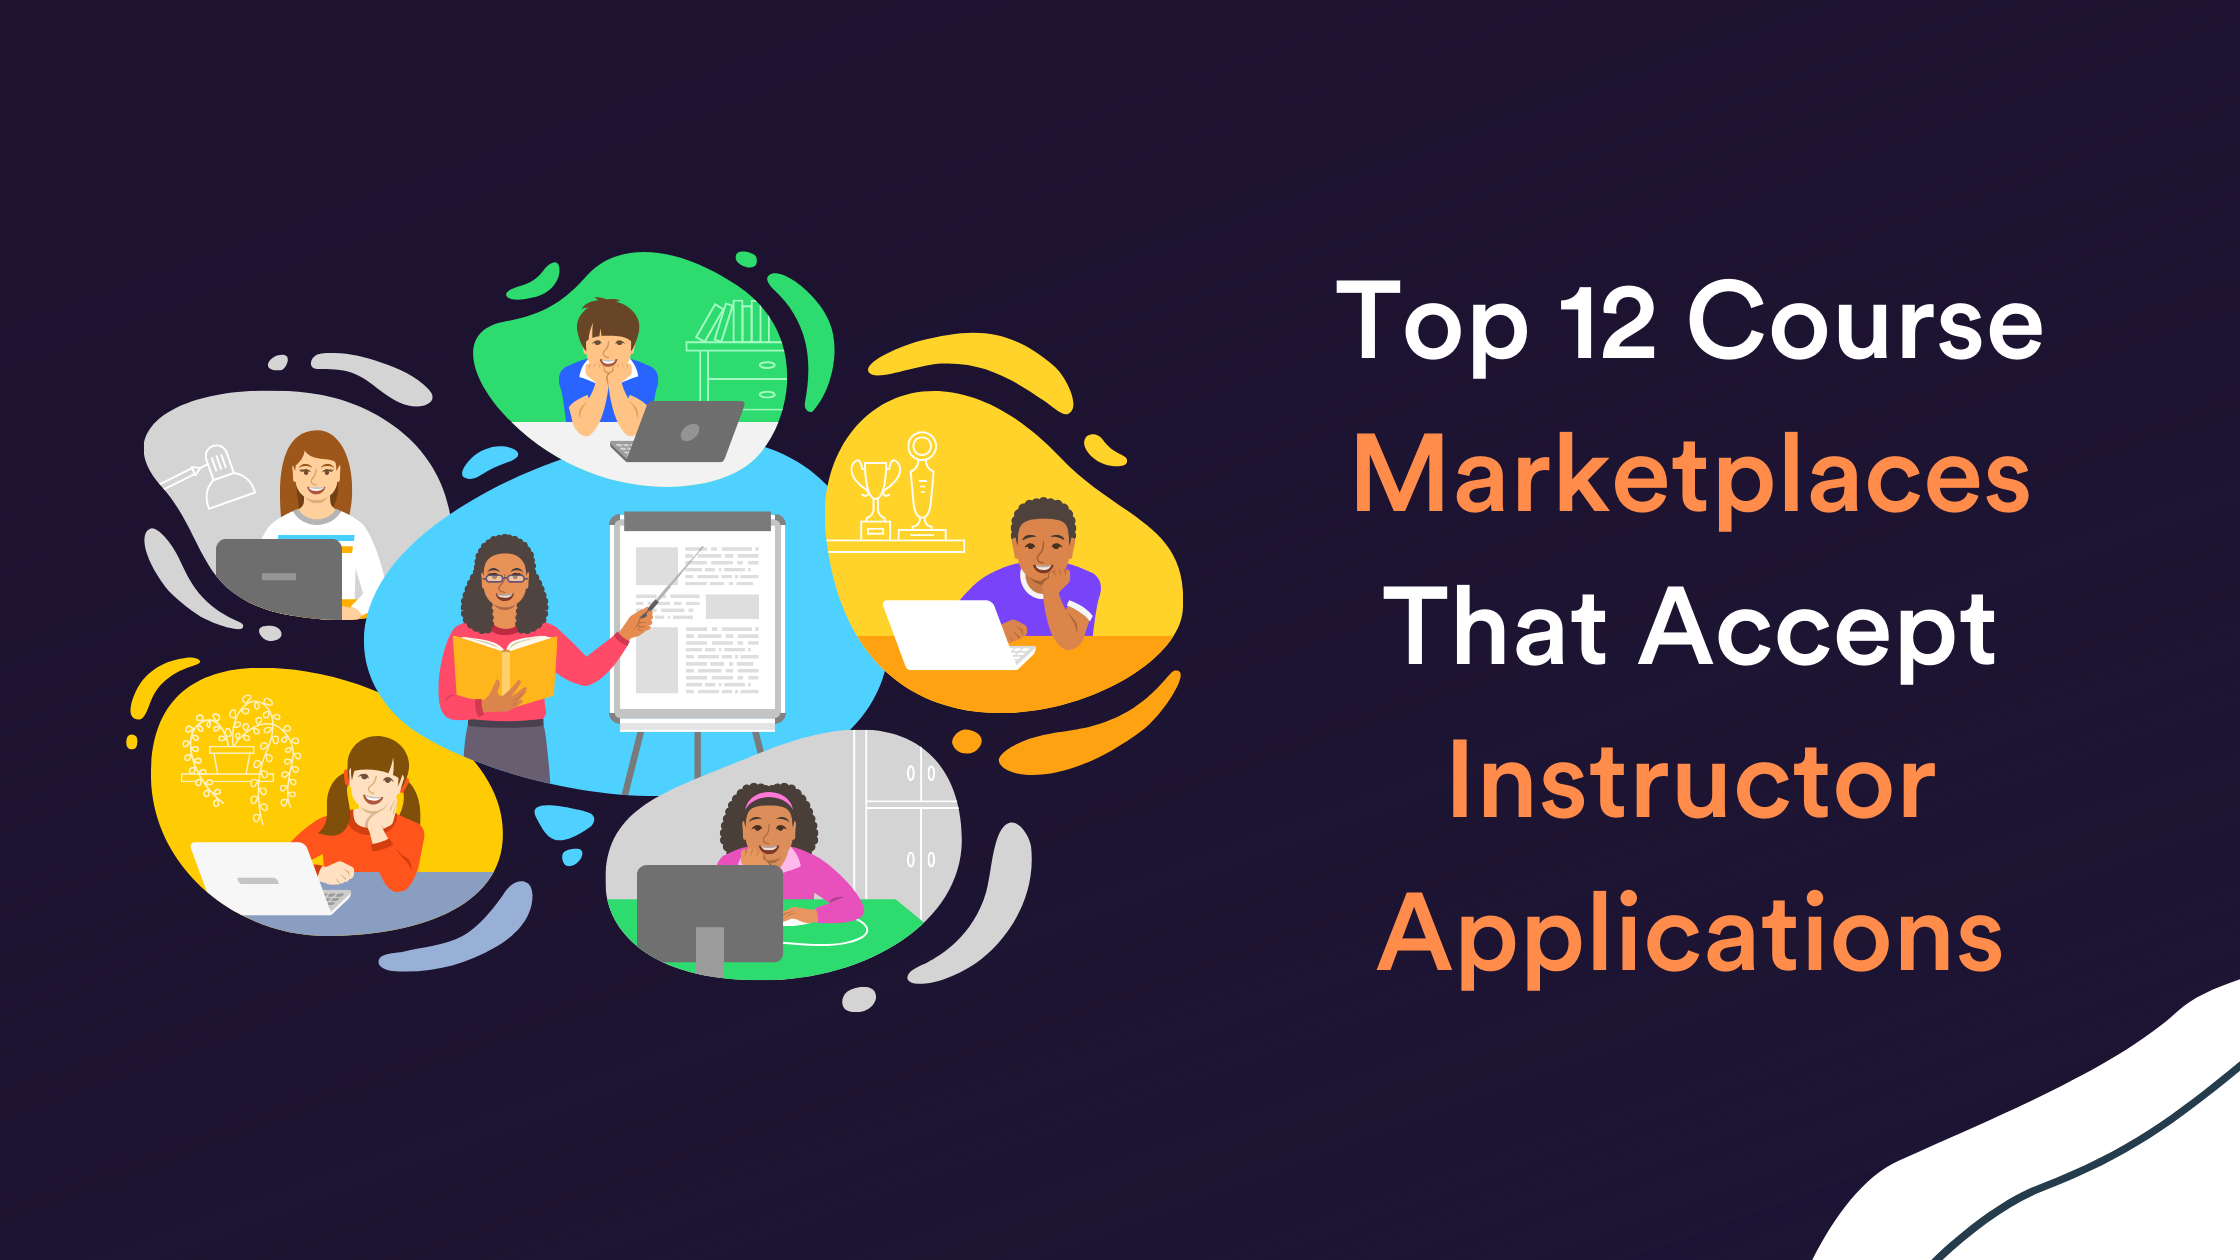 Top 12 Course Marketplaces That Accept Instructor Applications